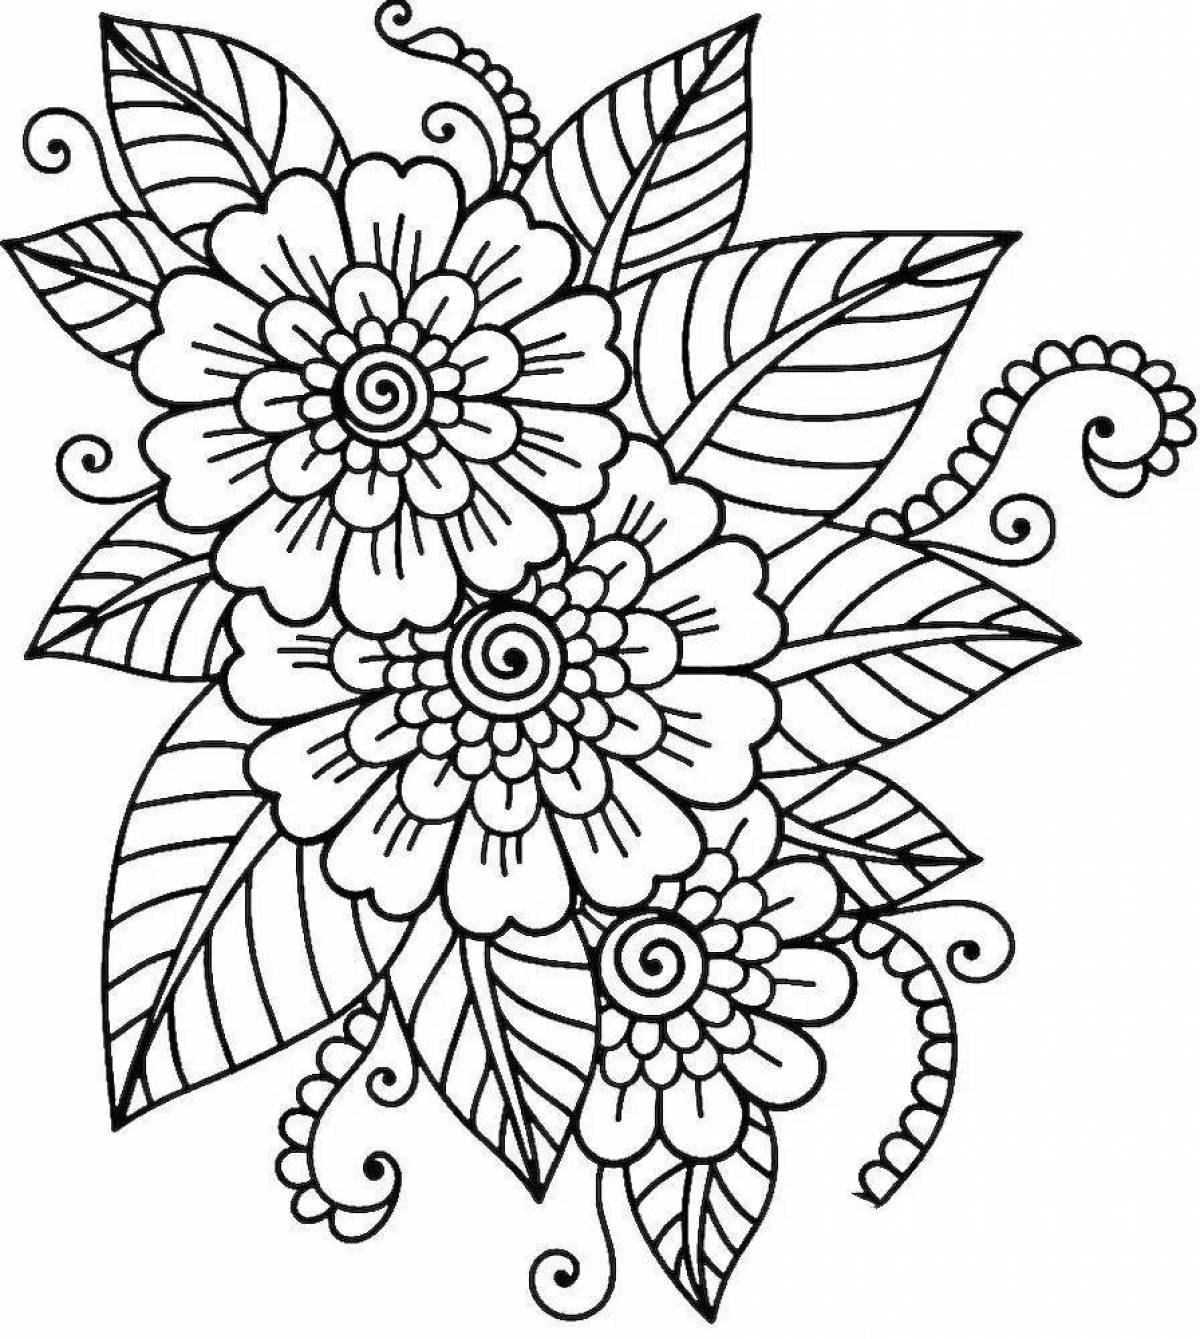 Amazing sunflower coloring book